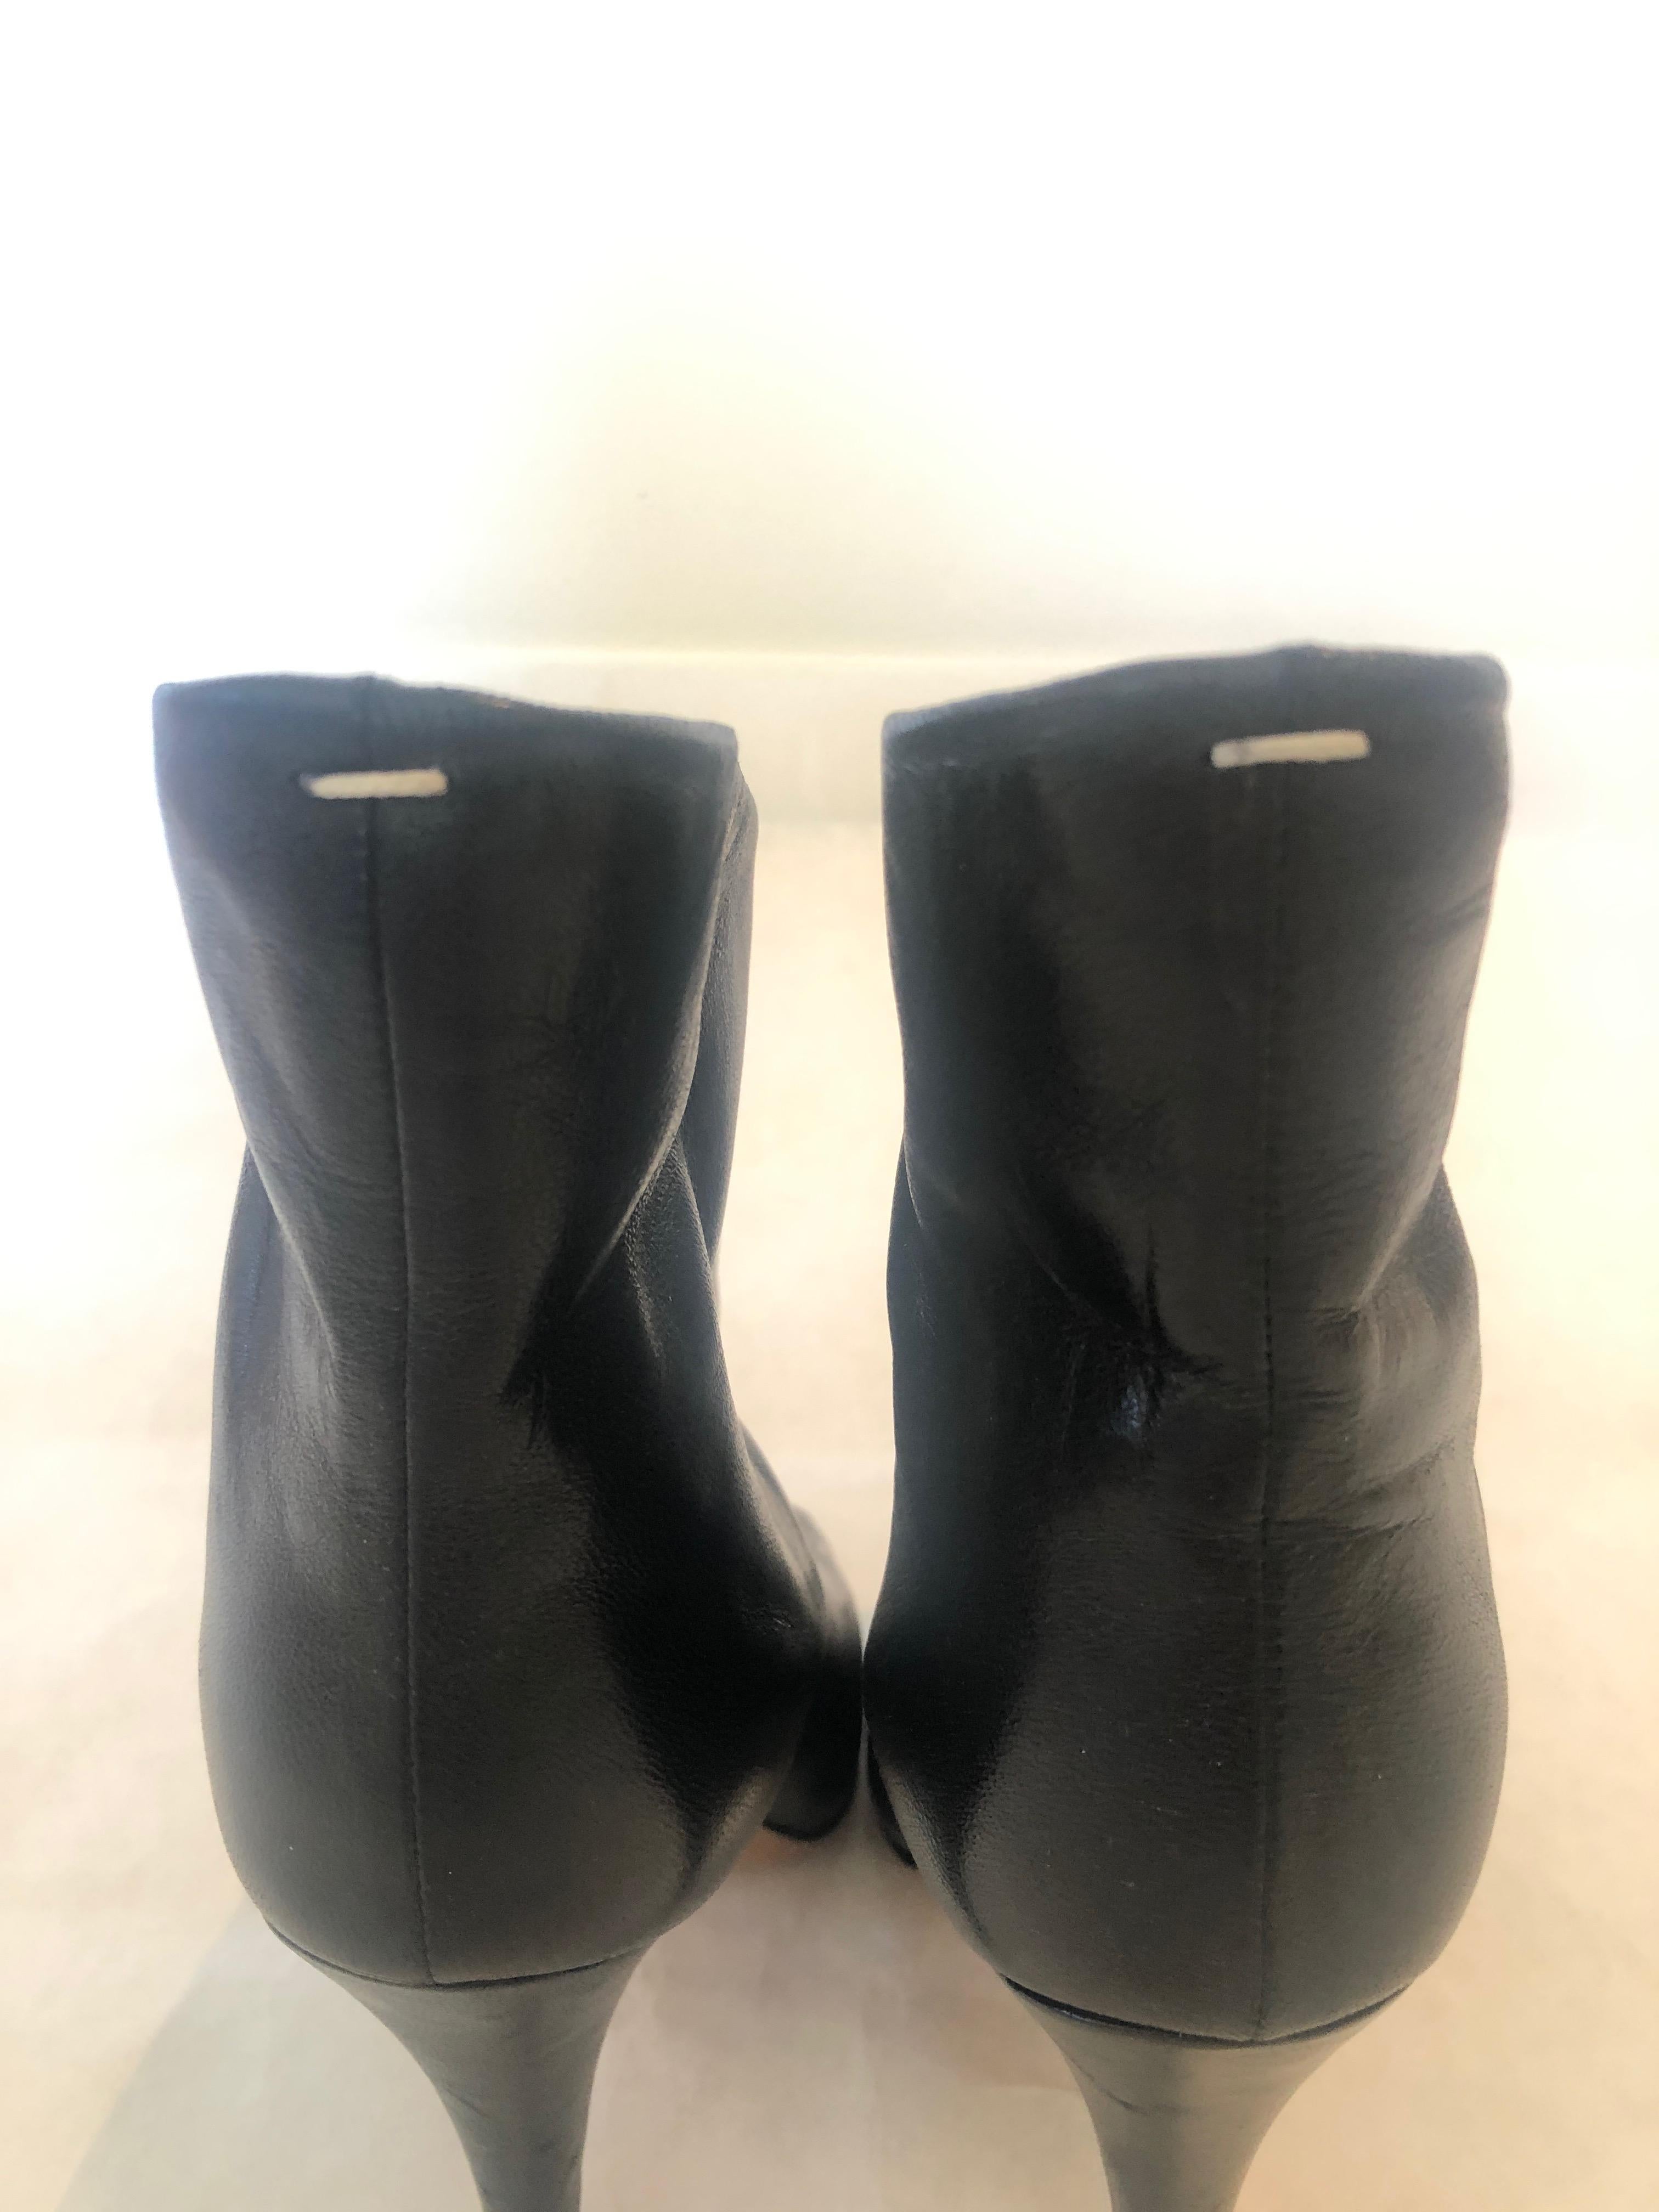 Pair of Maison Martin Margiala Black Open Toe Ankle Boots w/ Wide Unfitted Top  For Sale 11